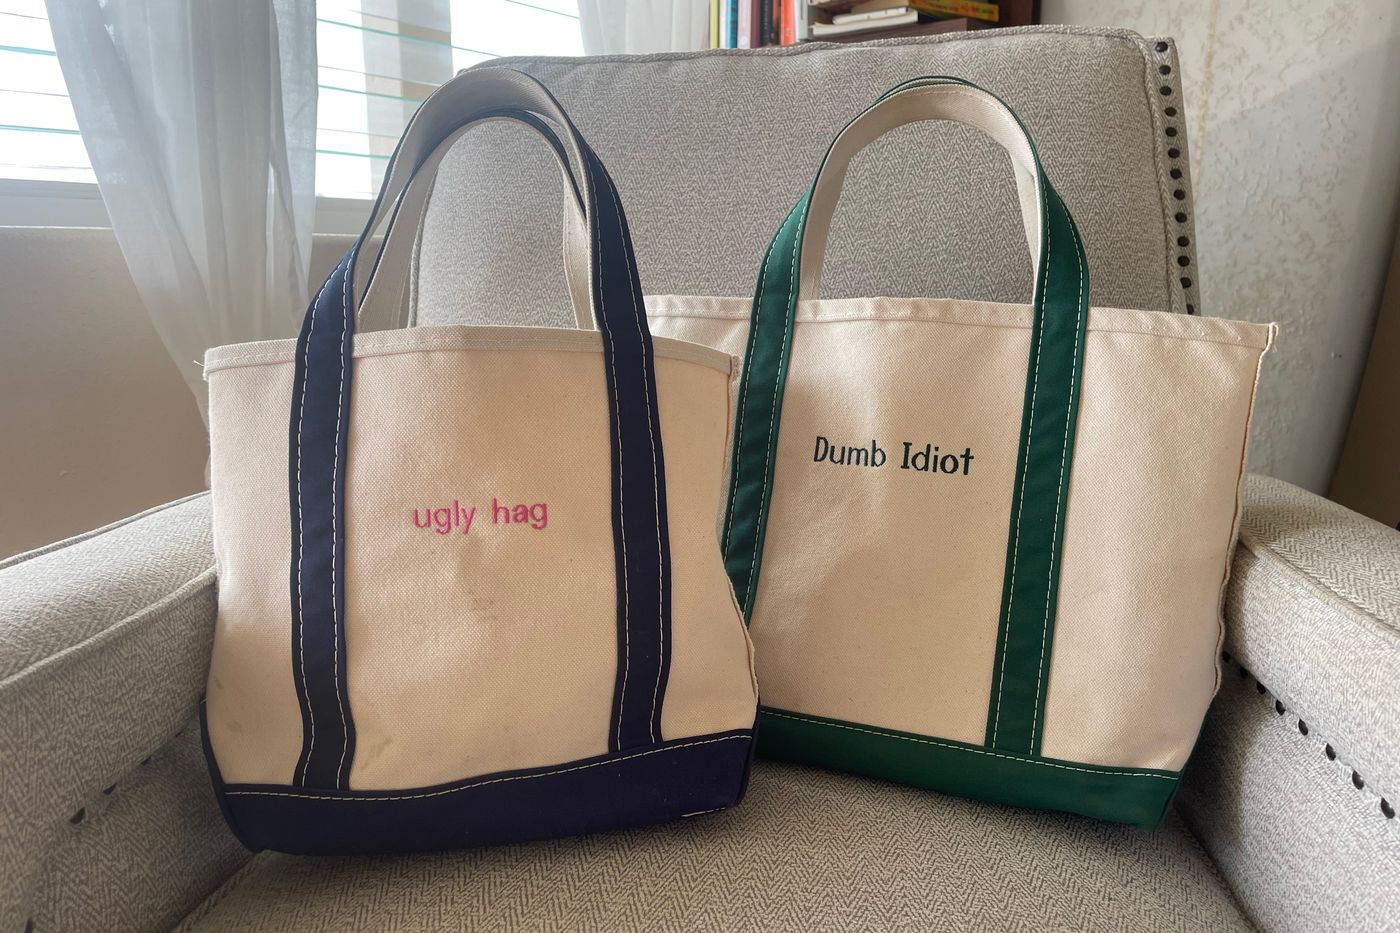 boat and tote monogram ideas